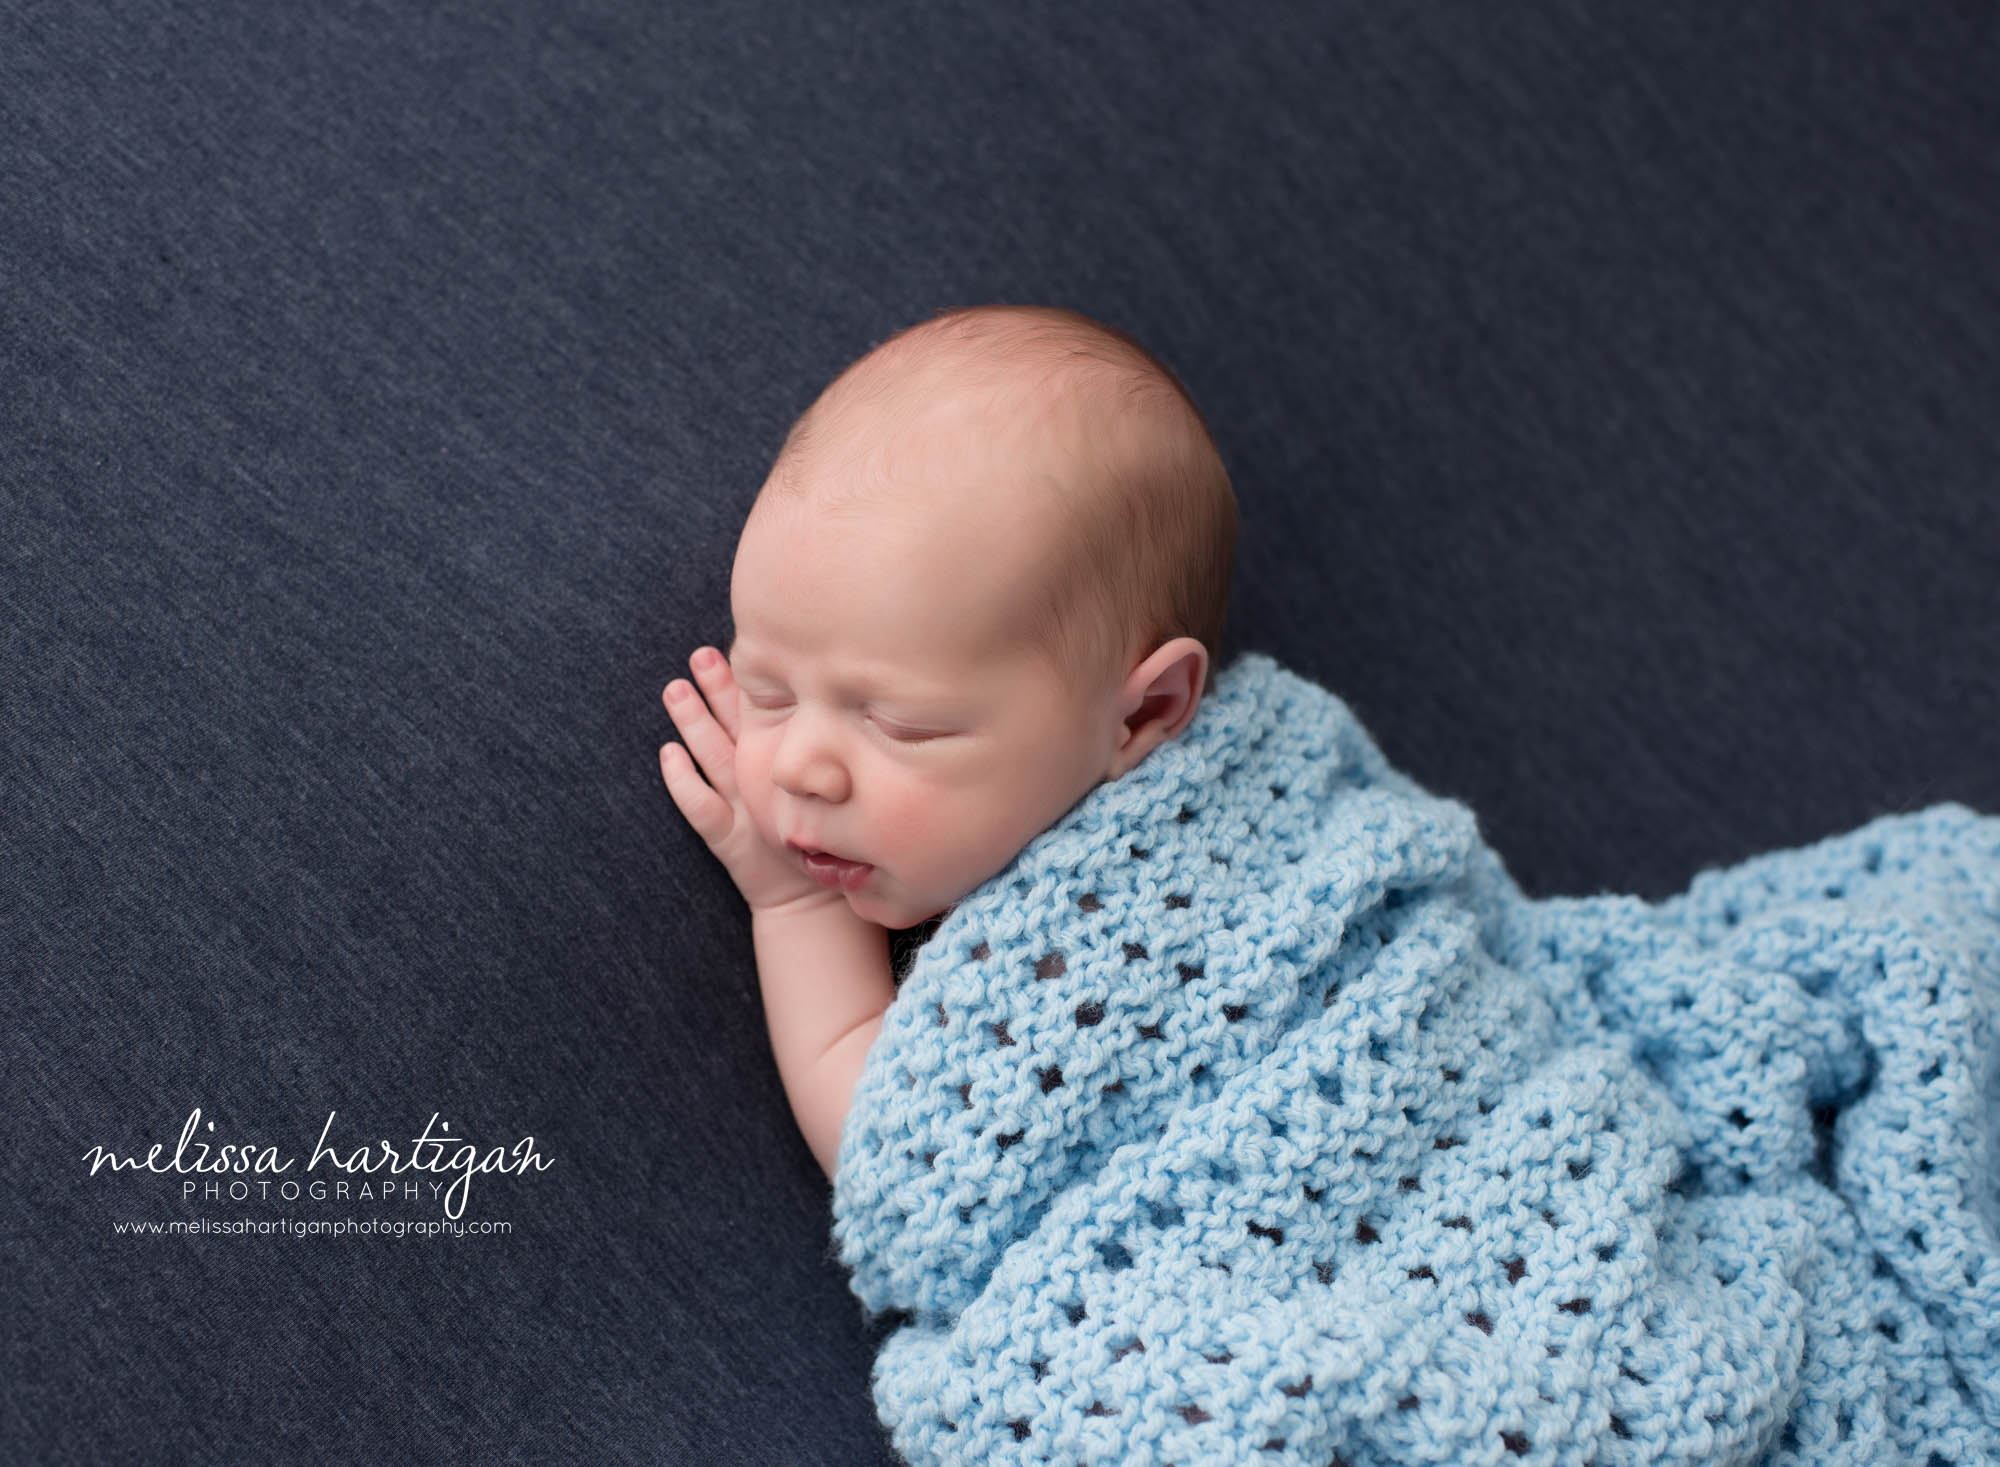 newborn baby boy posedf on blue backdrop with knitted blue baby blanket wrapped around him Newborn Photography Middlesex county